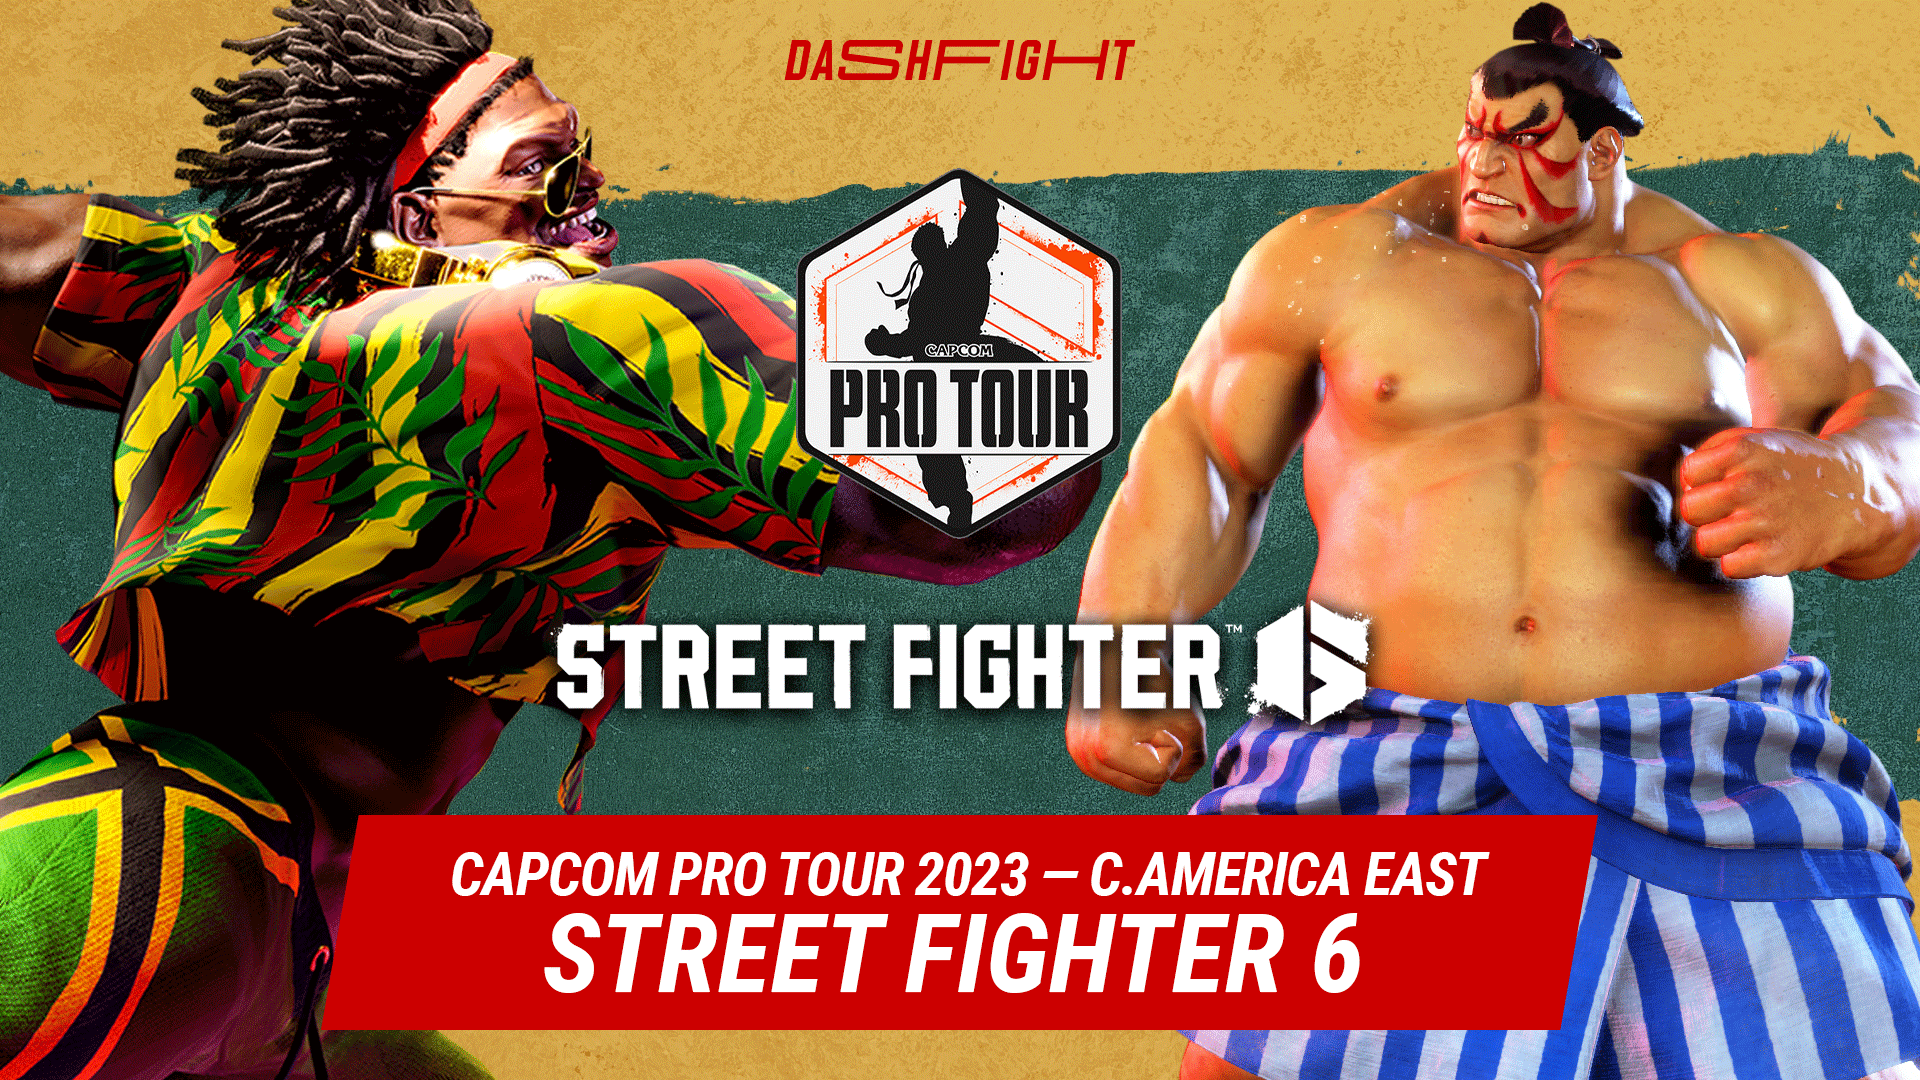 Capcom Pro Tour 2023 Central America East Results and Standings